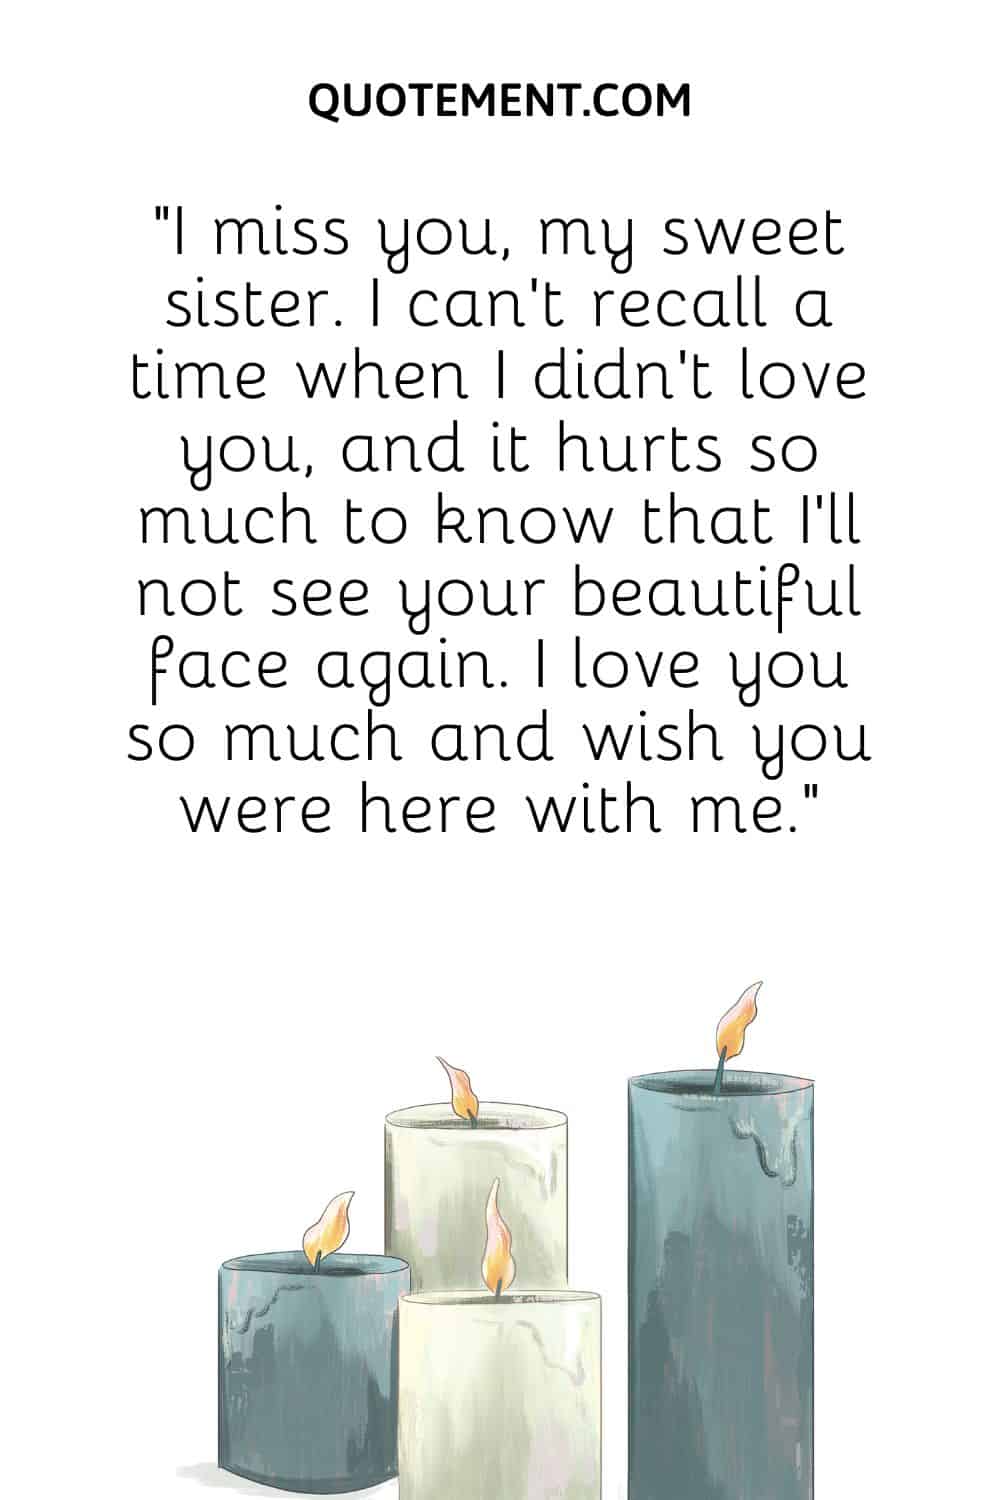 “I miss you, my sweet sister. I can’t recall a time when I didn’t love you, and it hurts so much to know that